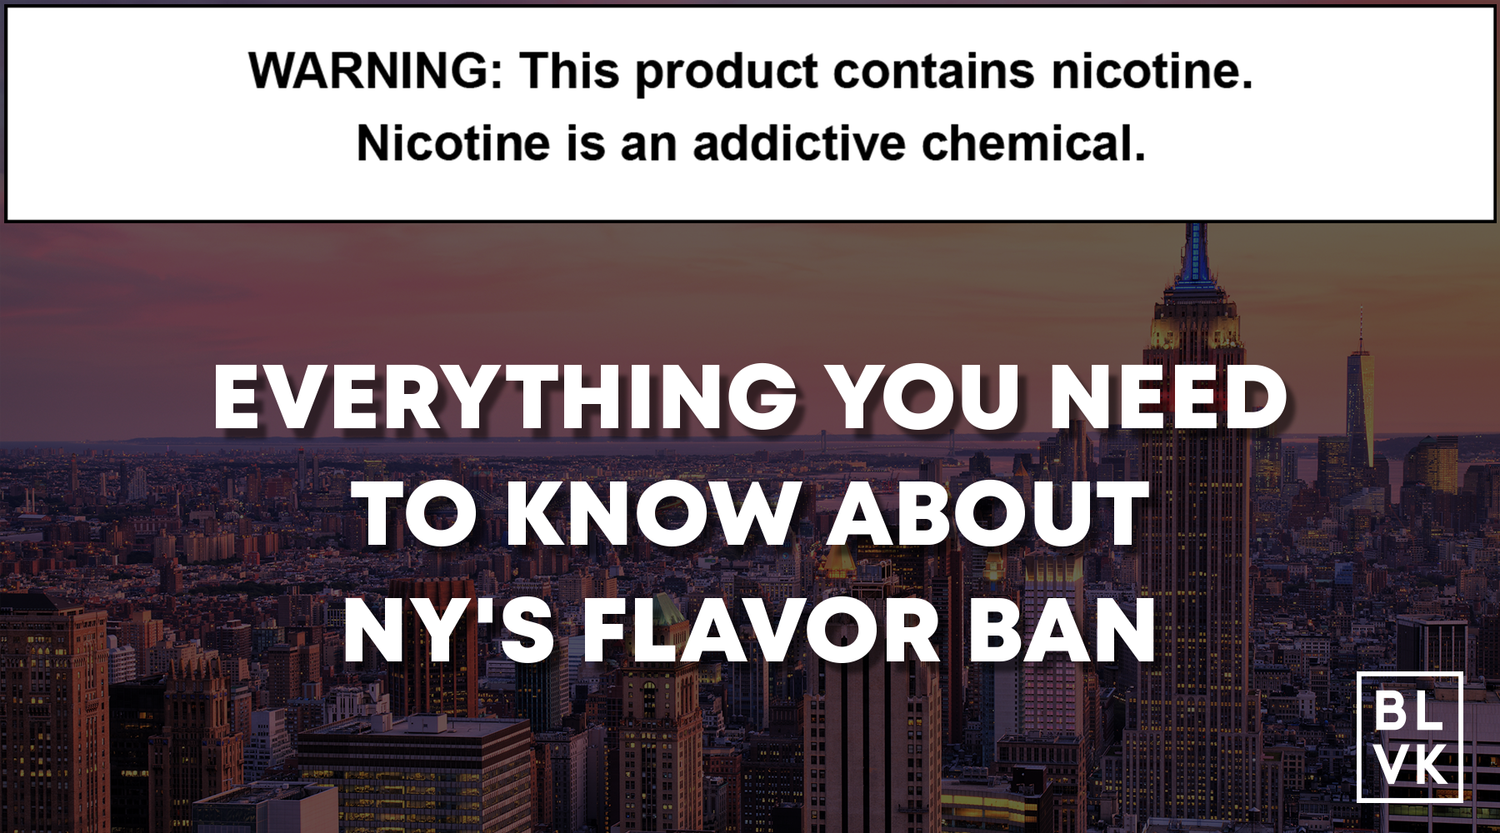 New York Becomes the 2nd State to Ban Flavored E-Cigarettes